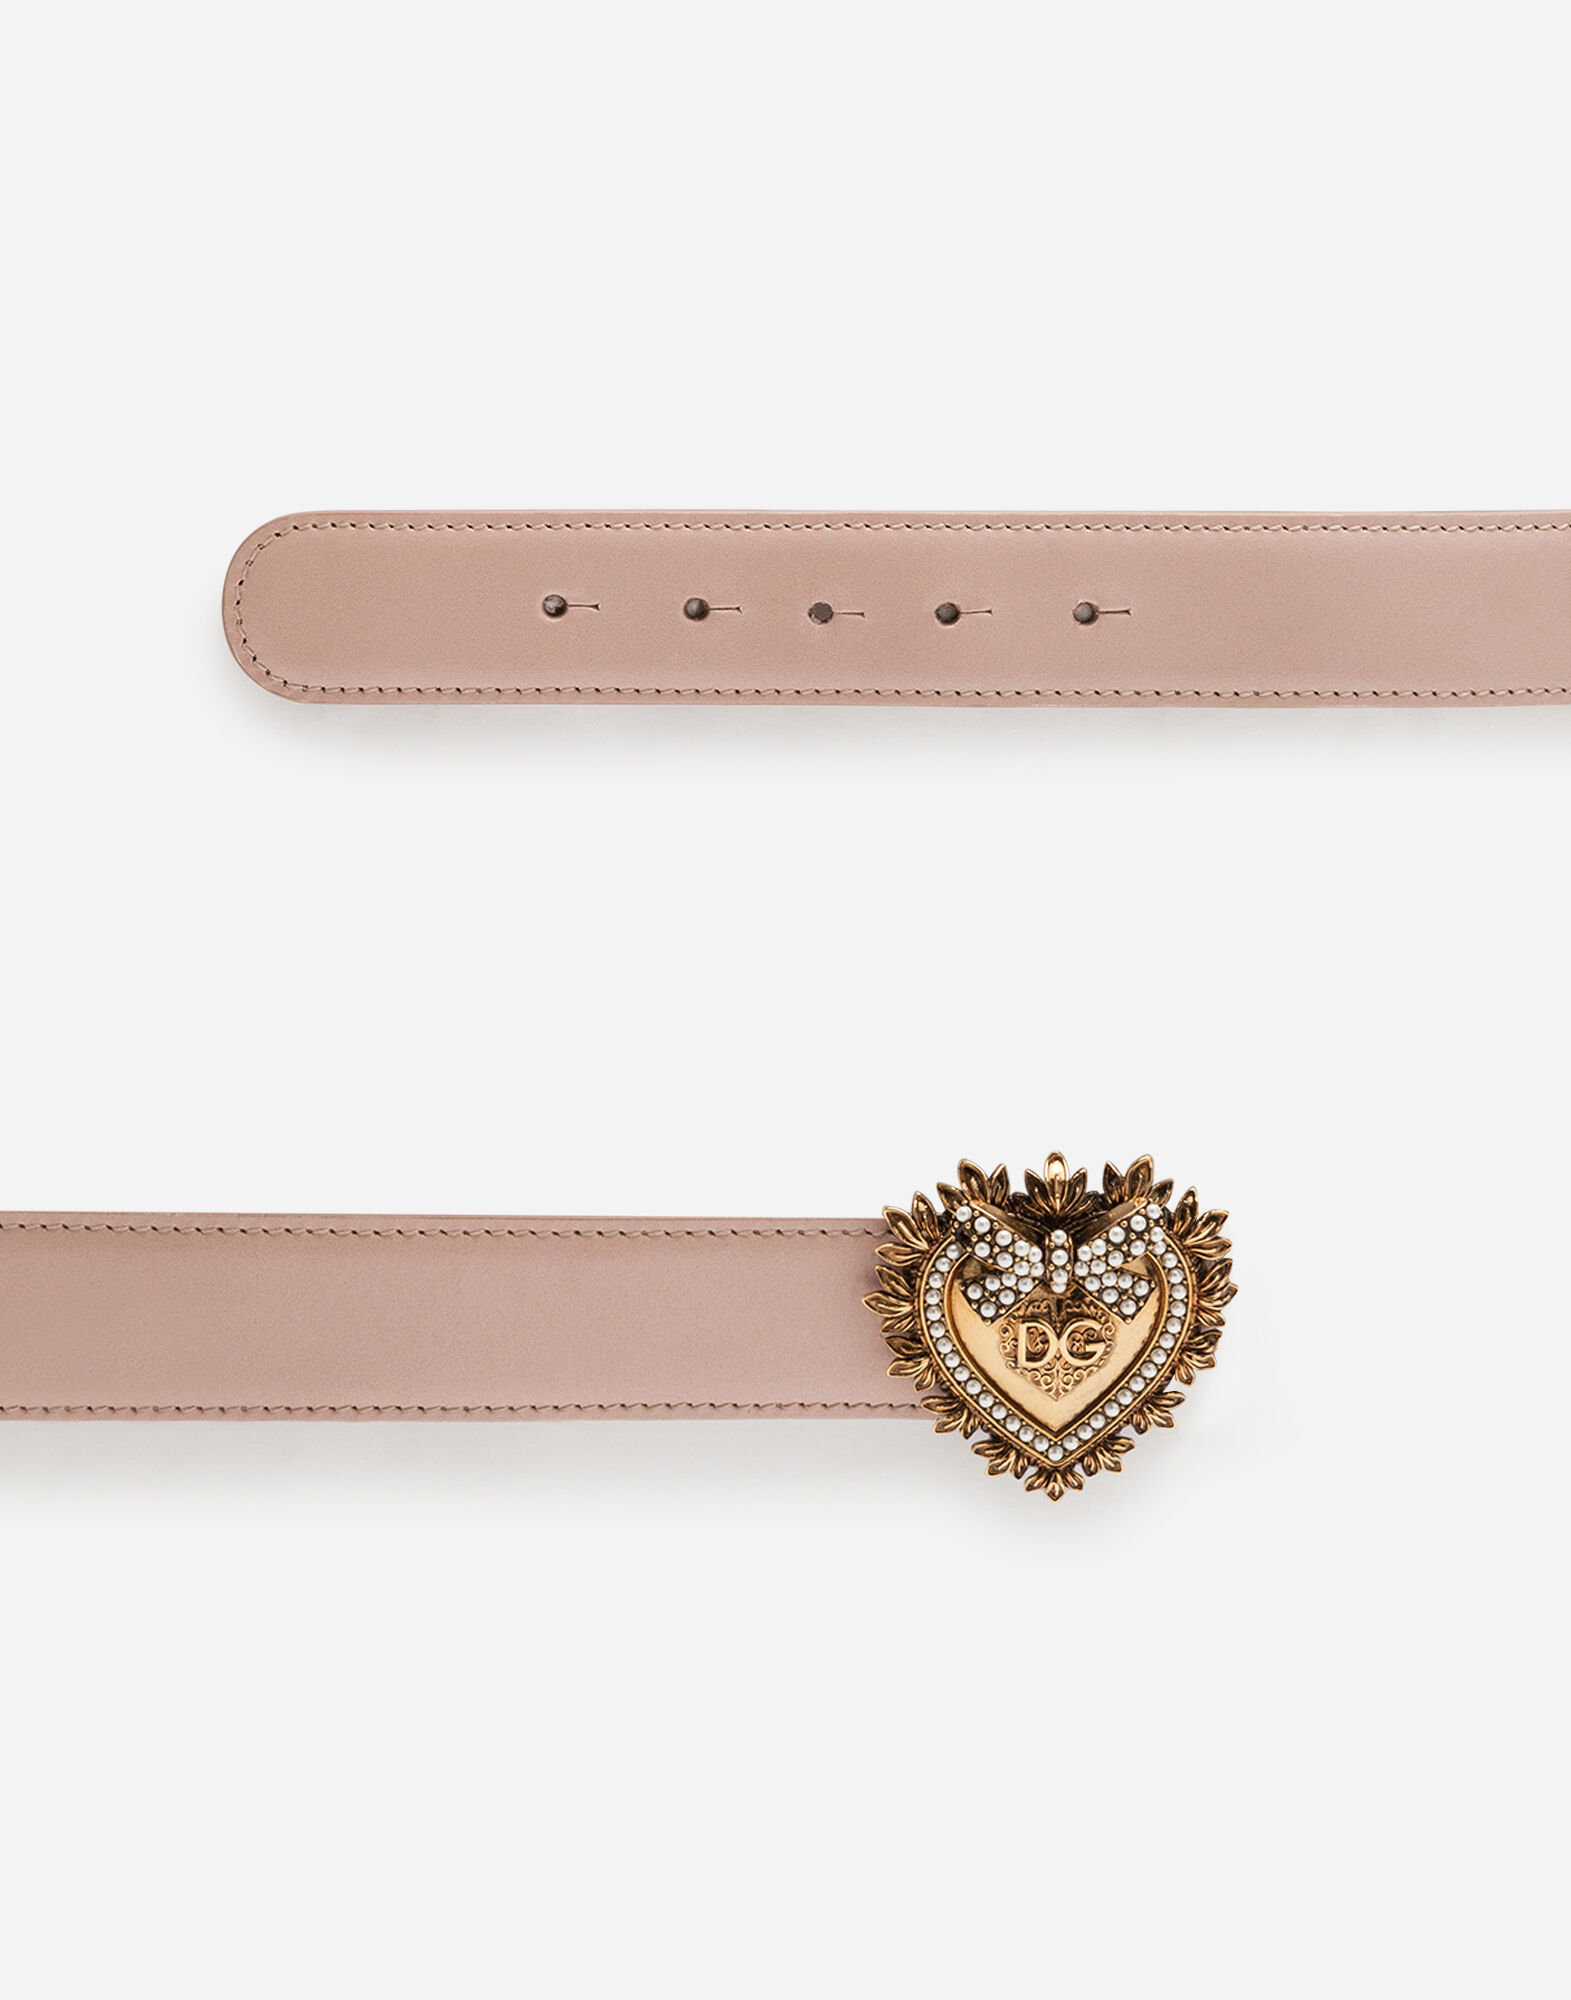 Devotion belt in lux leather in Pale Pink for | Dolce&Gabbana® US